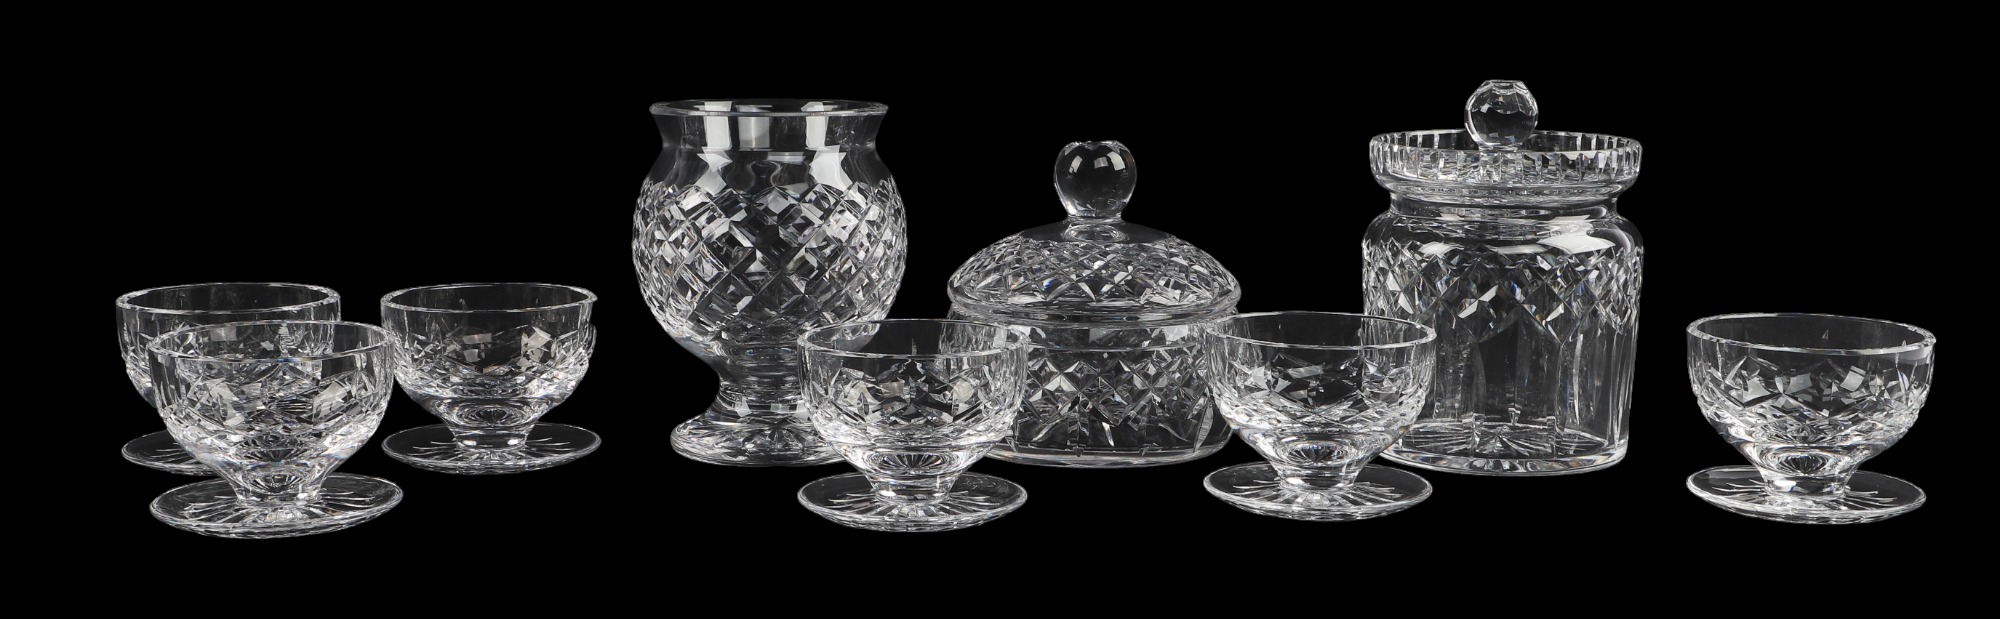 Waterford crystal dessert bowls 3ca60a